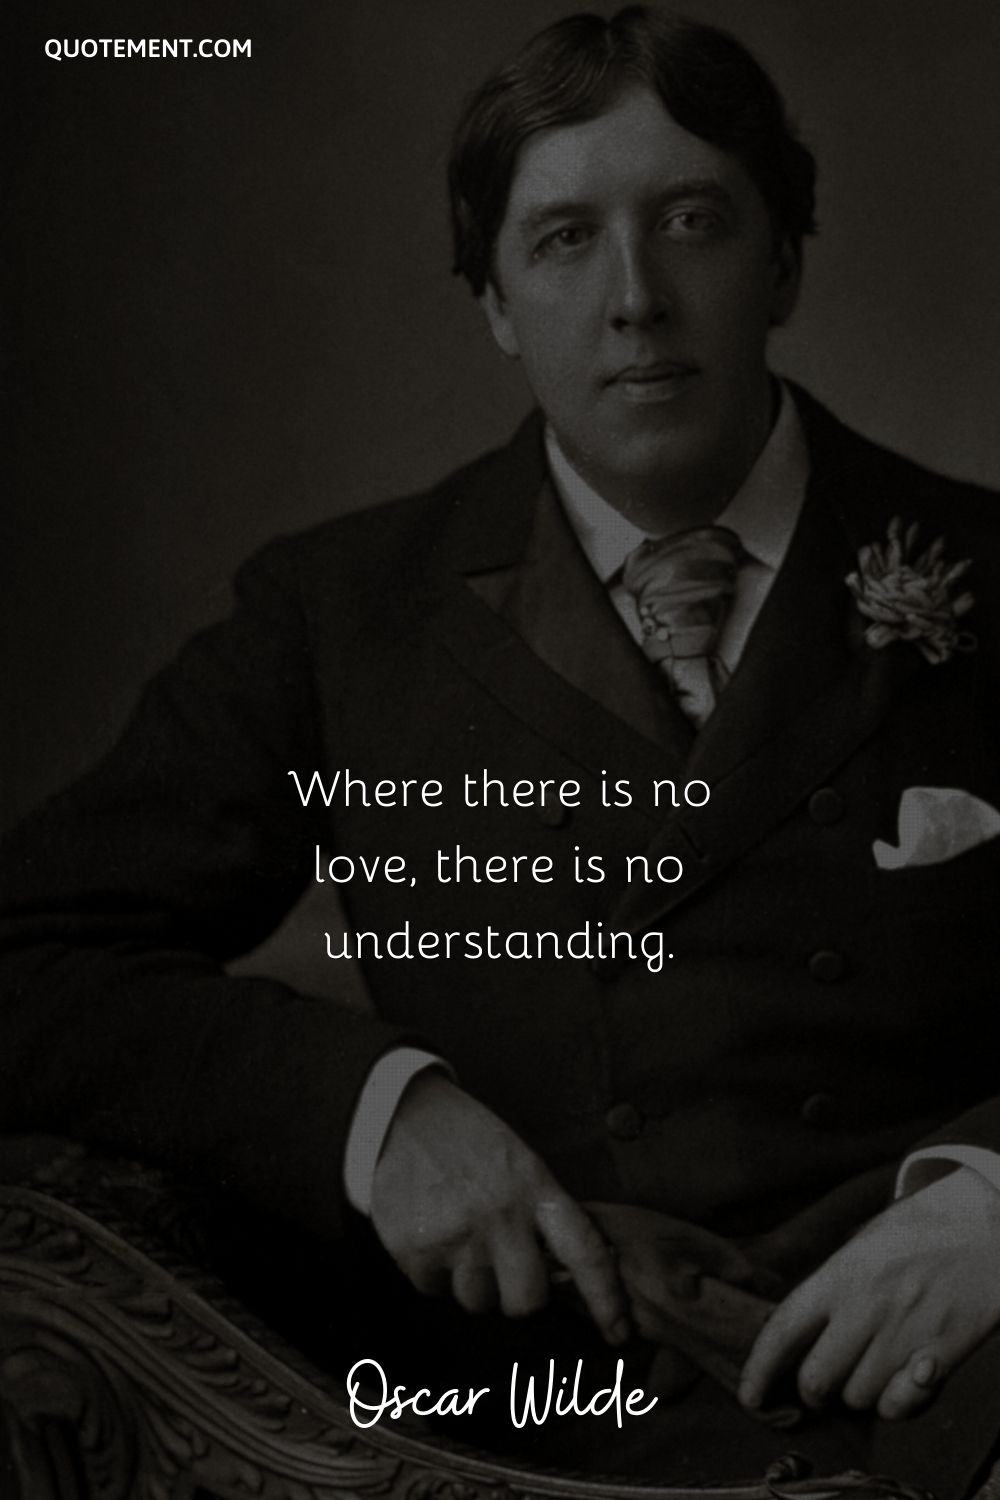 Quote on relationship and Oscar Wilde's portrait.